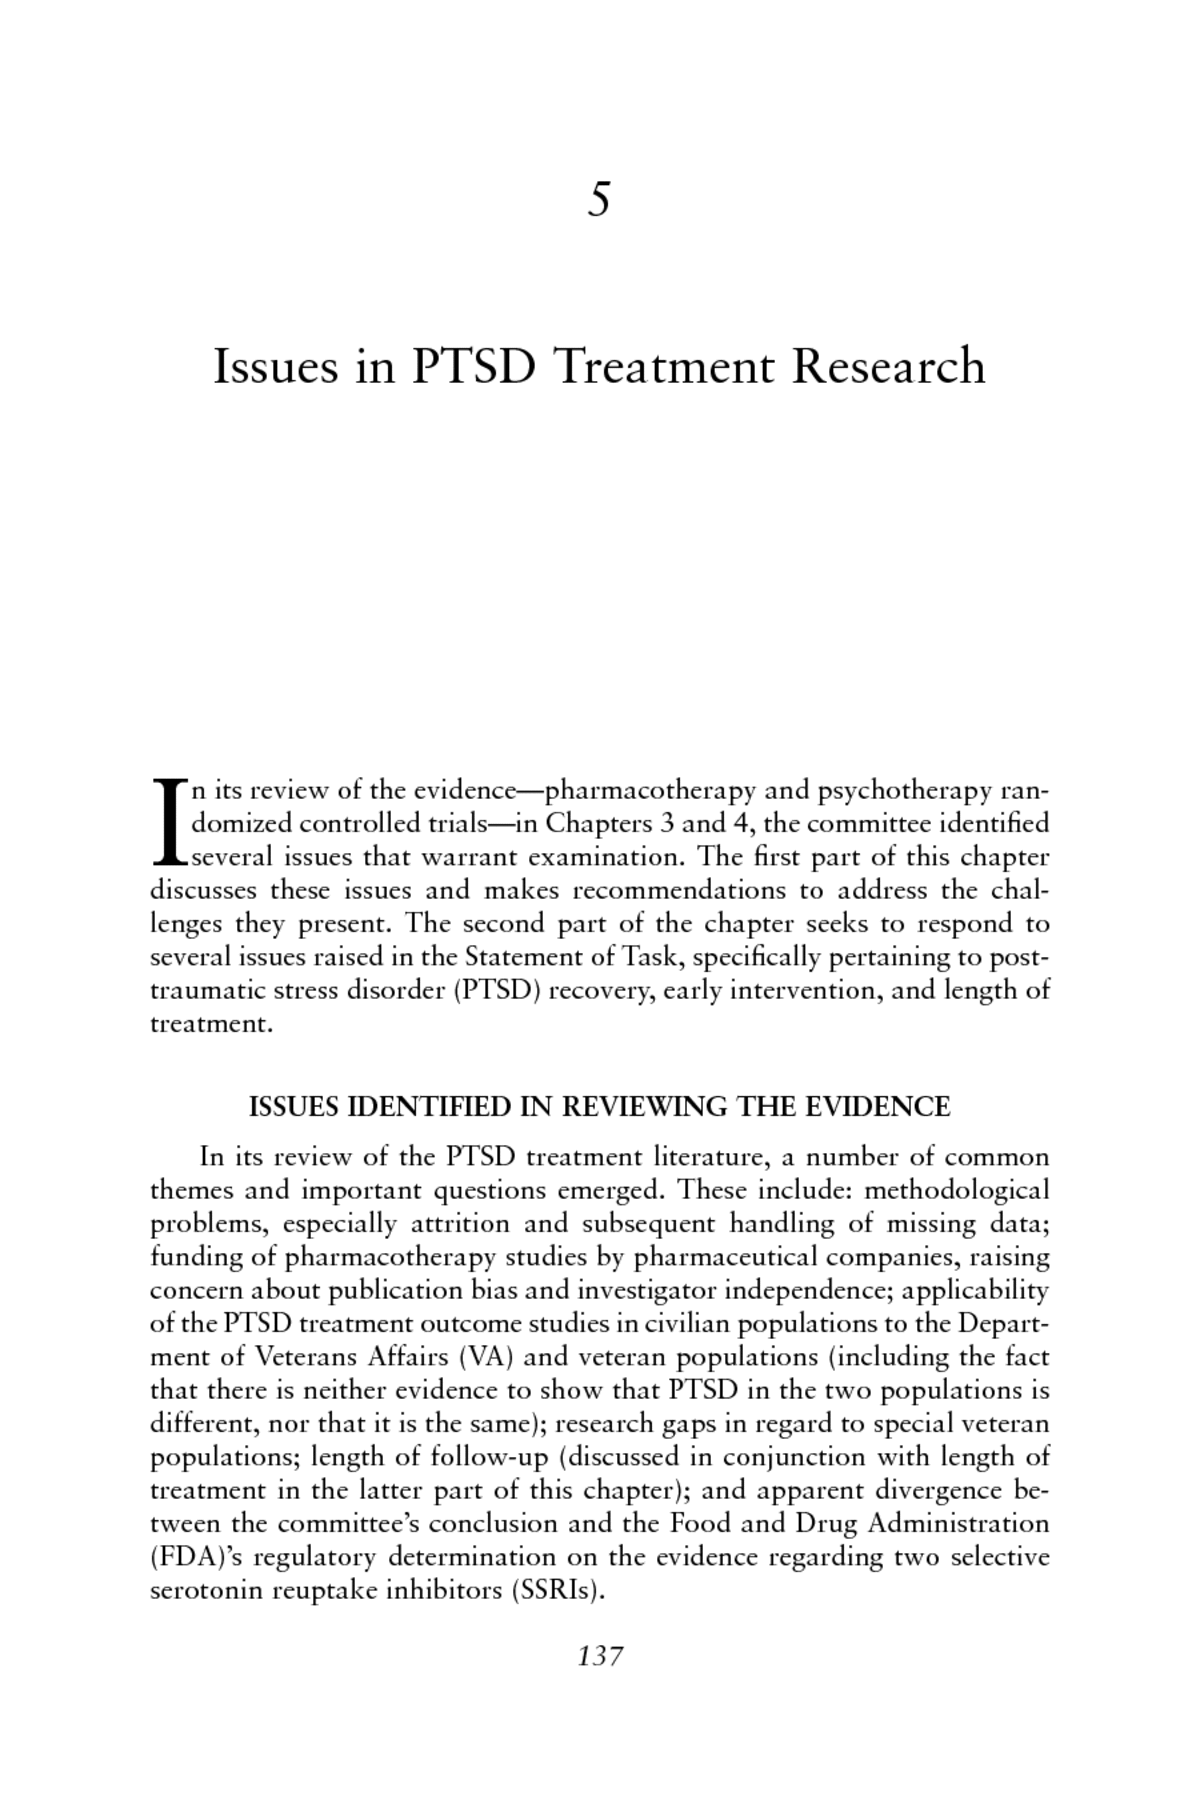 thesis statement example for ptsd